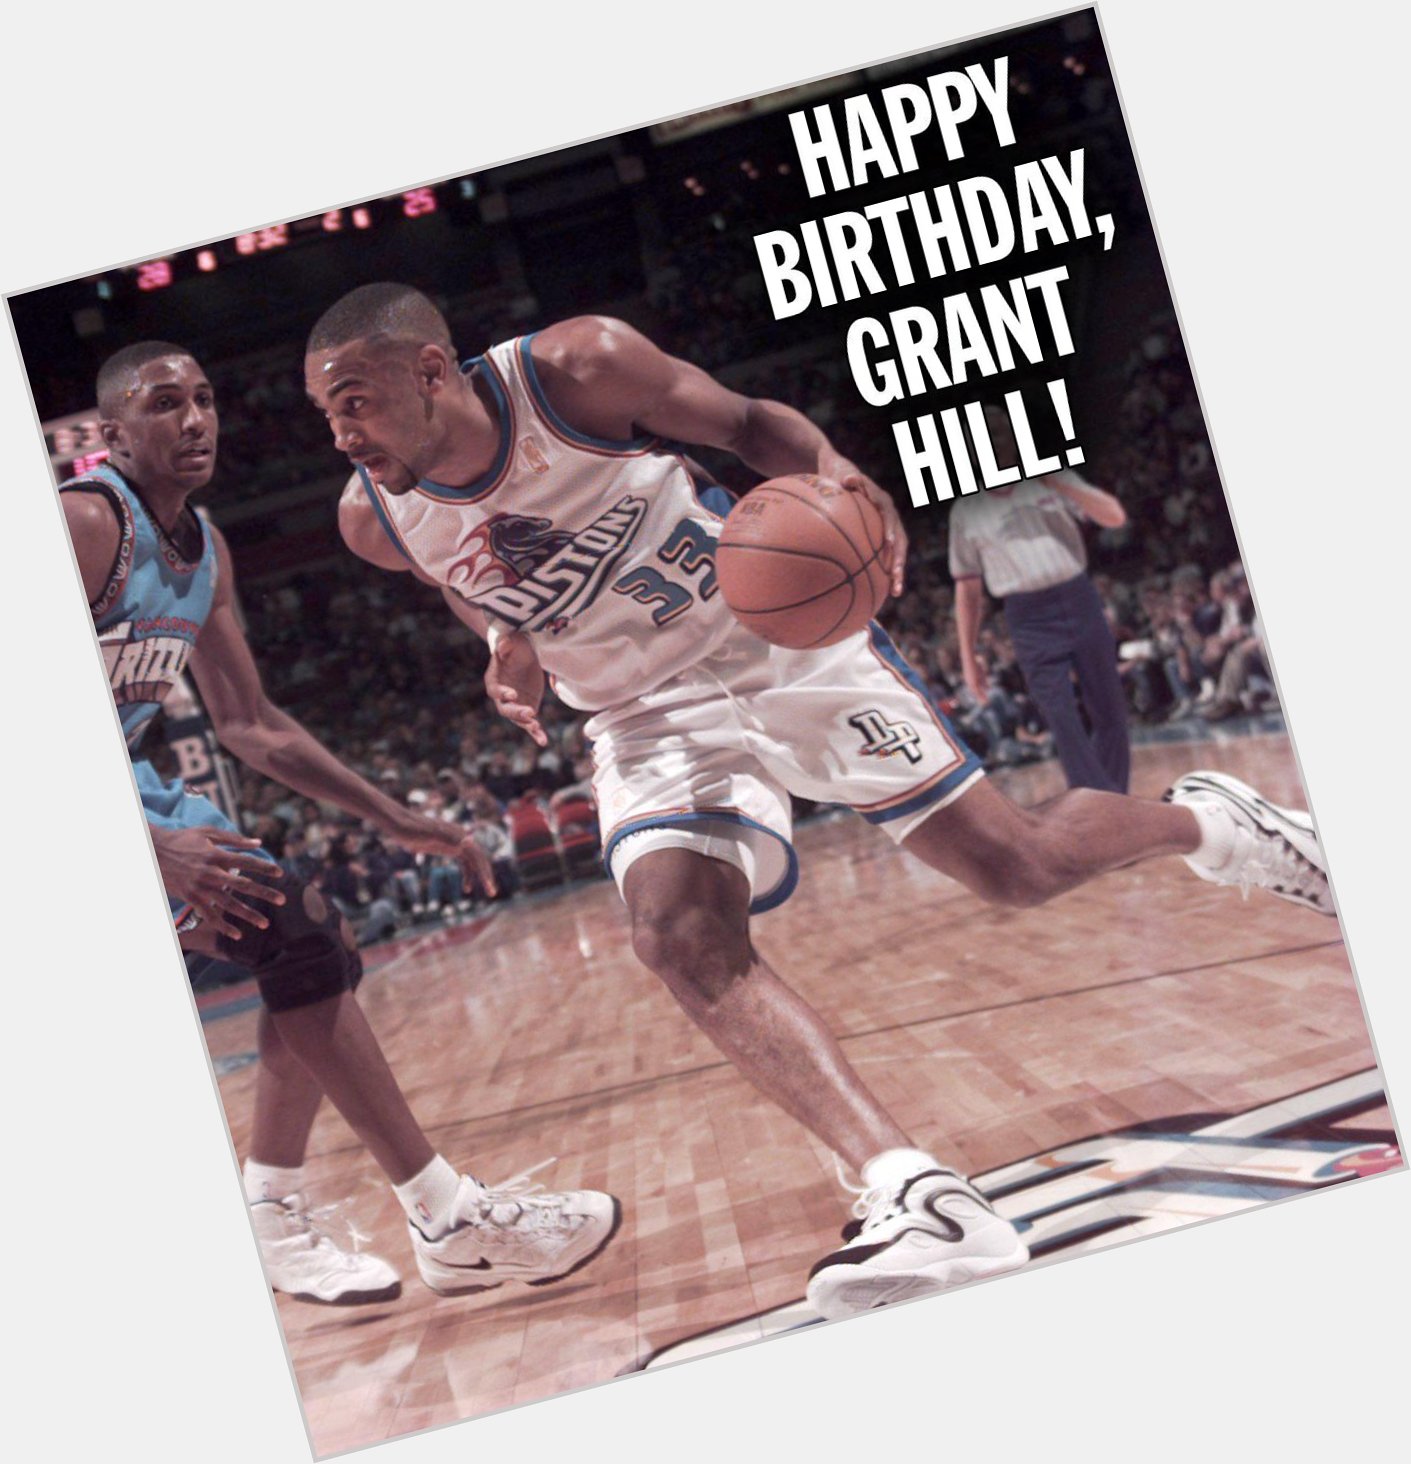 Happy birthday to former player Grant Hill! 